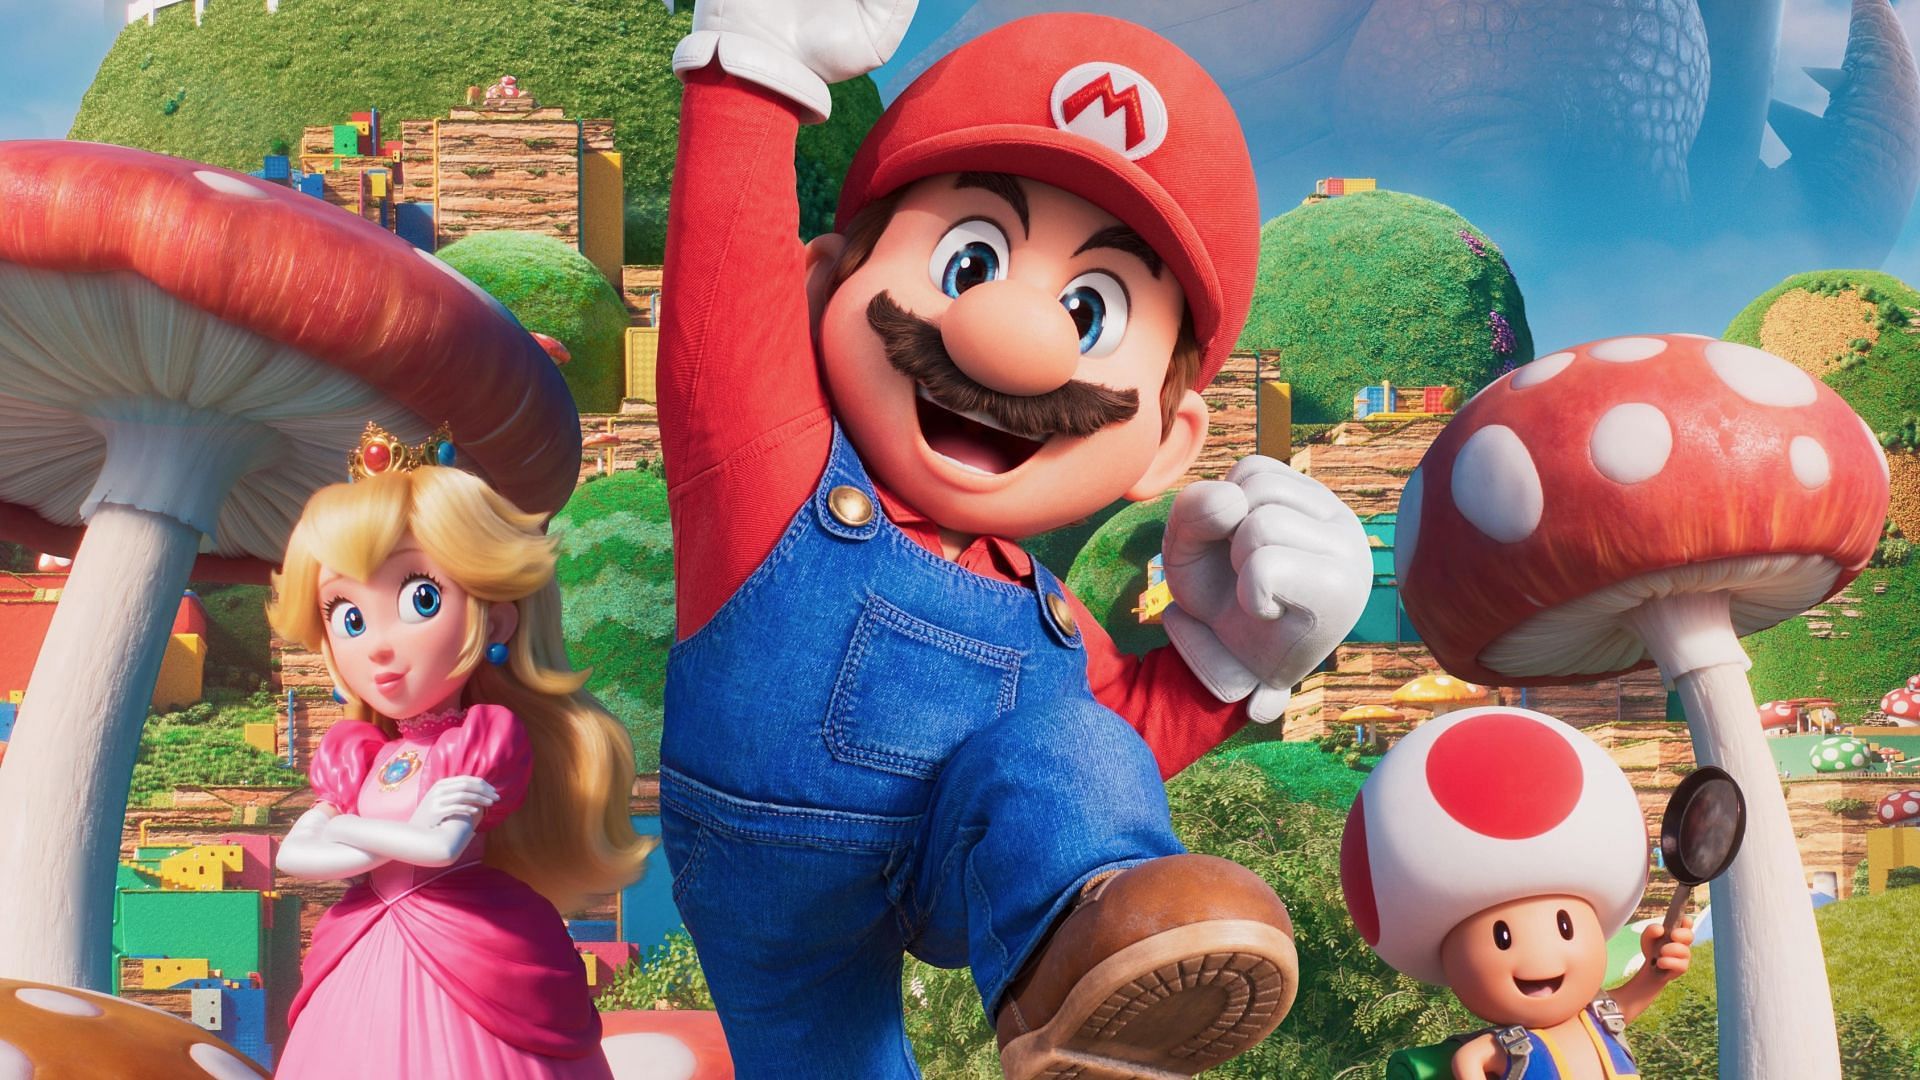 Nintendo Releases Two New Posters for The Super Mario Bros. Movie